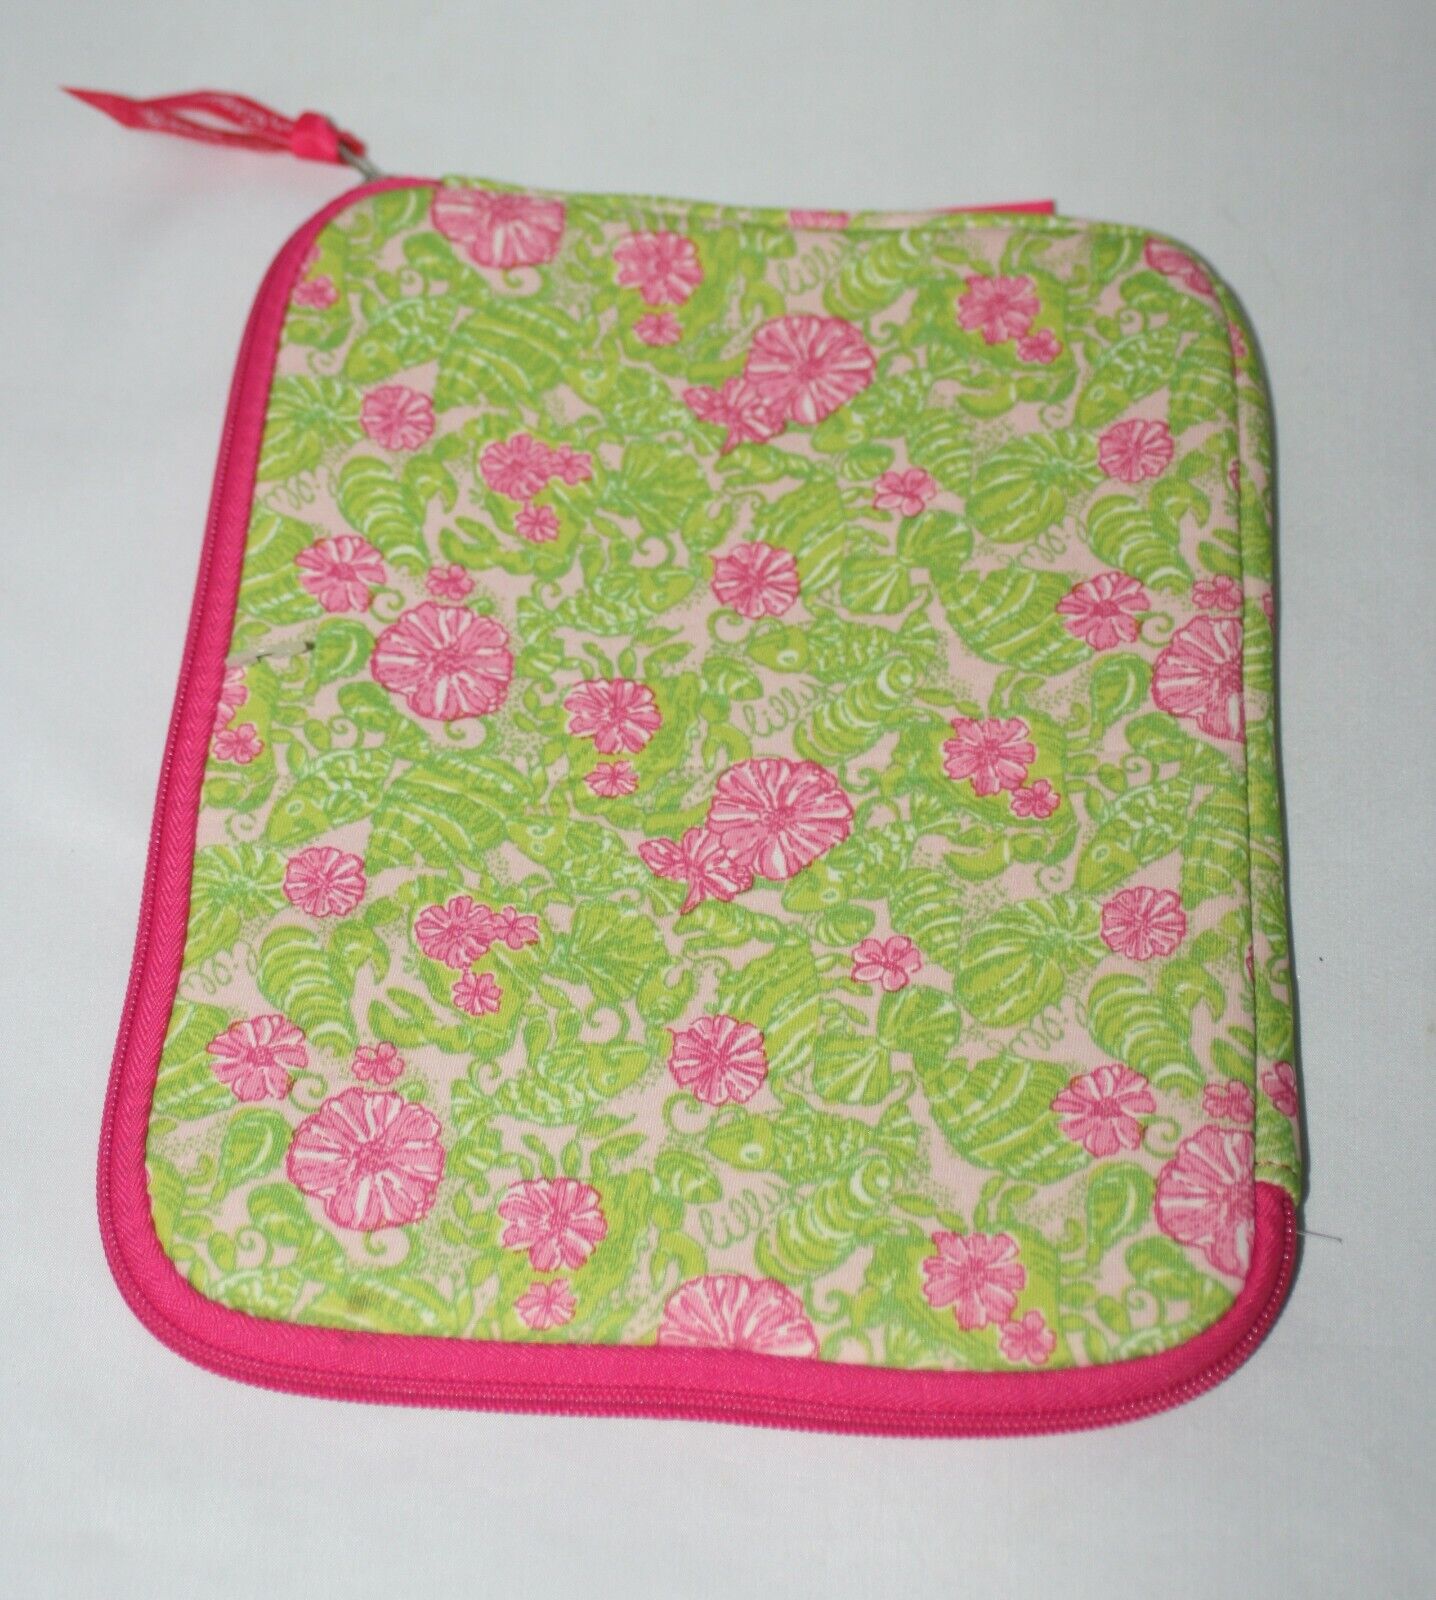 Lilly Pulitzer Chum Bucket Soft iPad Tablet Case Pink Green Sea 8 x 10 ~ NWOT